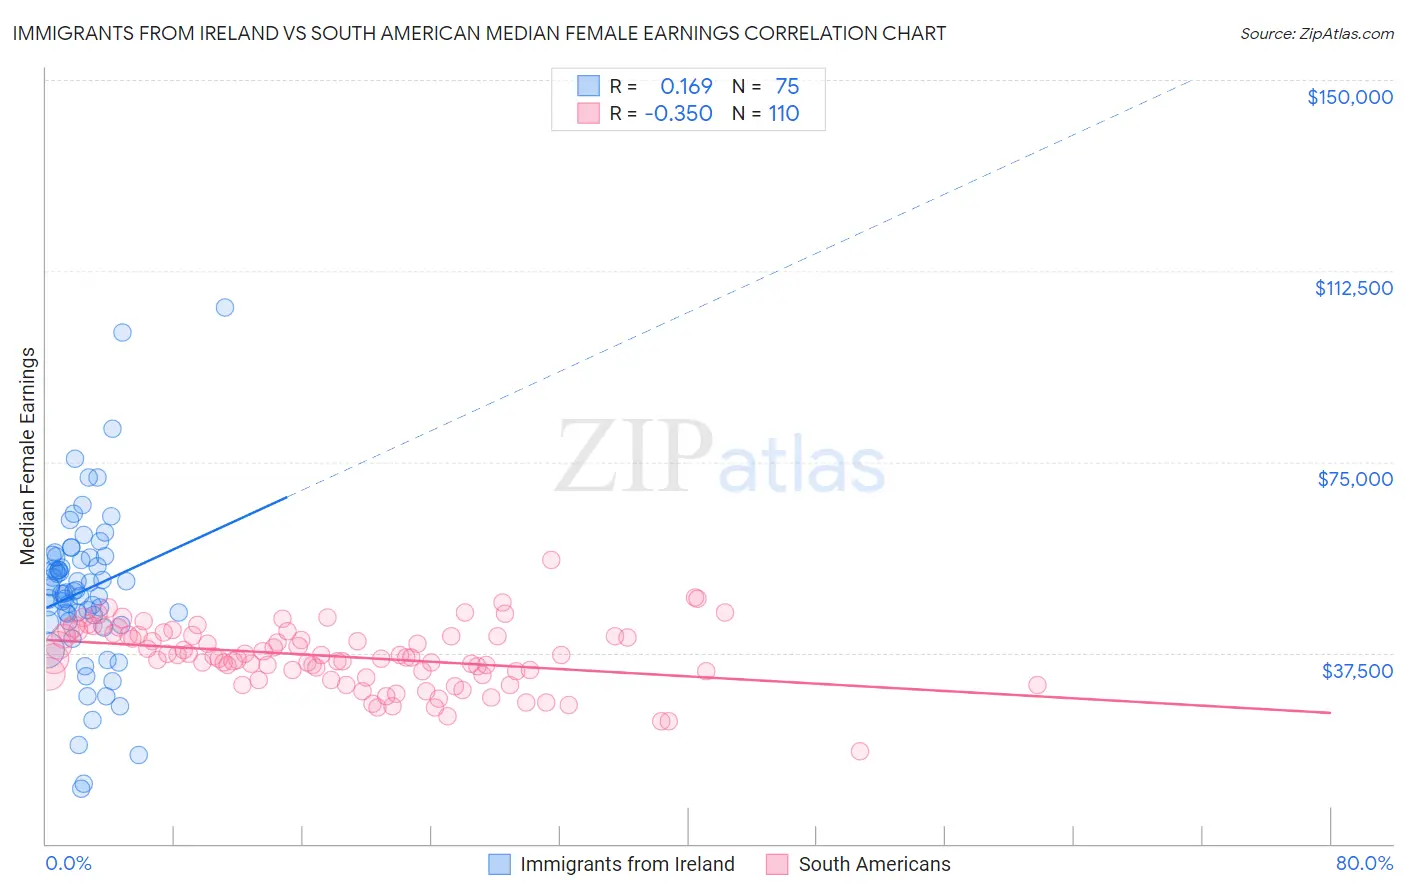 Immigrants from Ireland vs South American Median Female Earnings